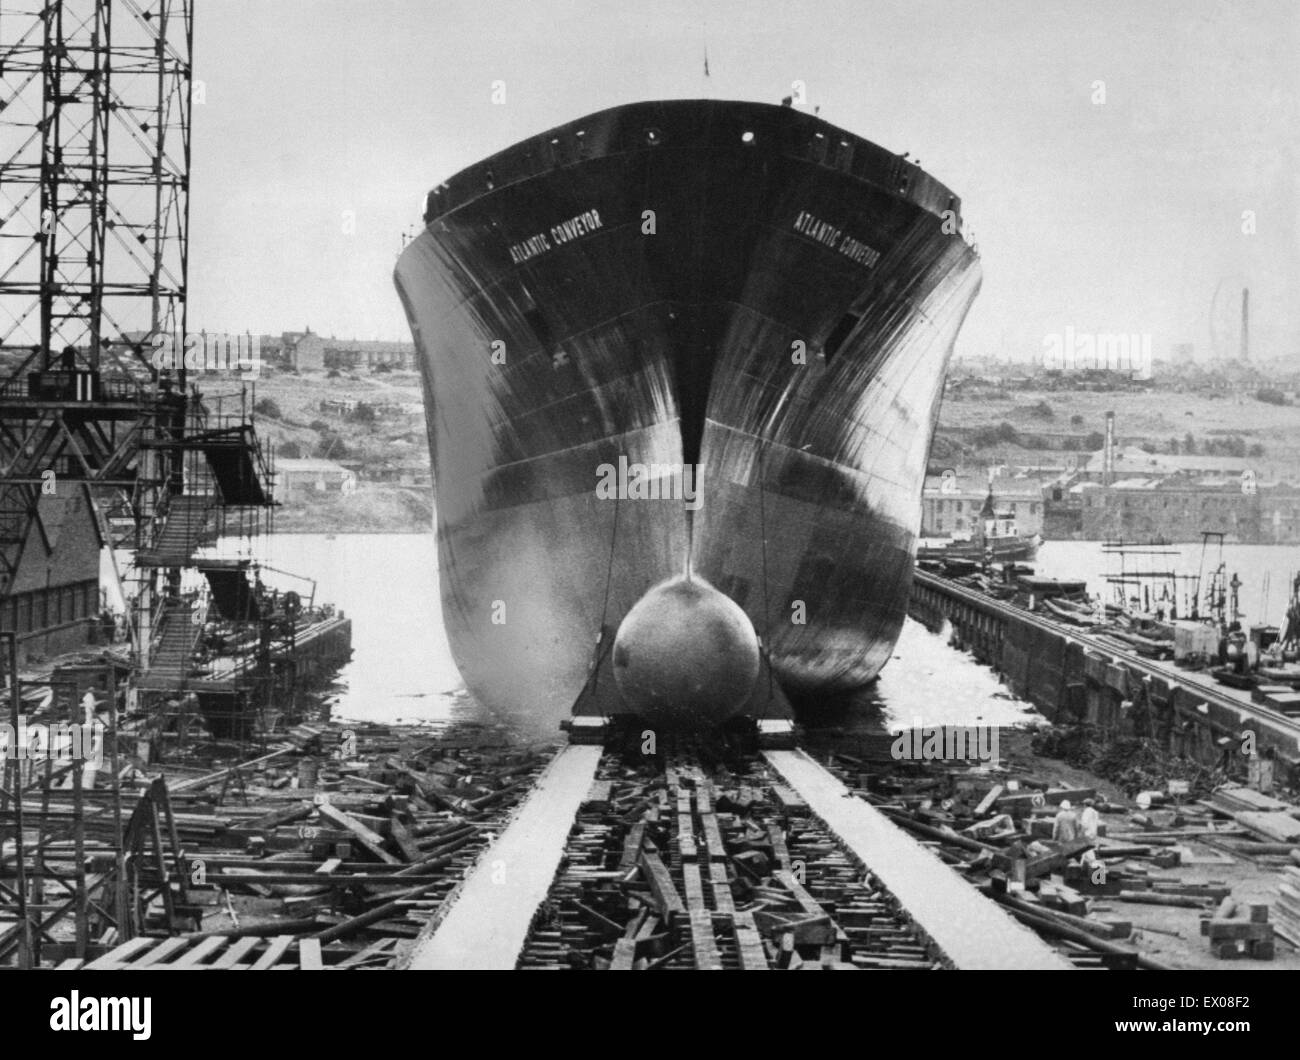 The launch of the Cunard container ship Atlantic Conveyor, at Wallsend on Tyne. Atlantic Conveyor was later requisitioned during the Falklands War. She was hit on 25 May 1982 by two Argentine air-launched AM39 Exocet missiles, killing 12 sailors. August 1 Stock Photo